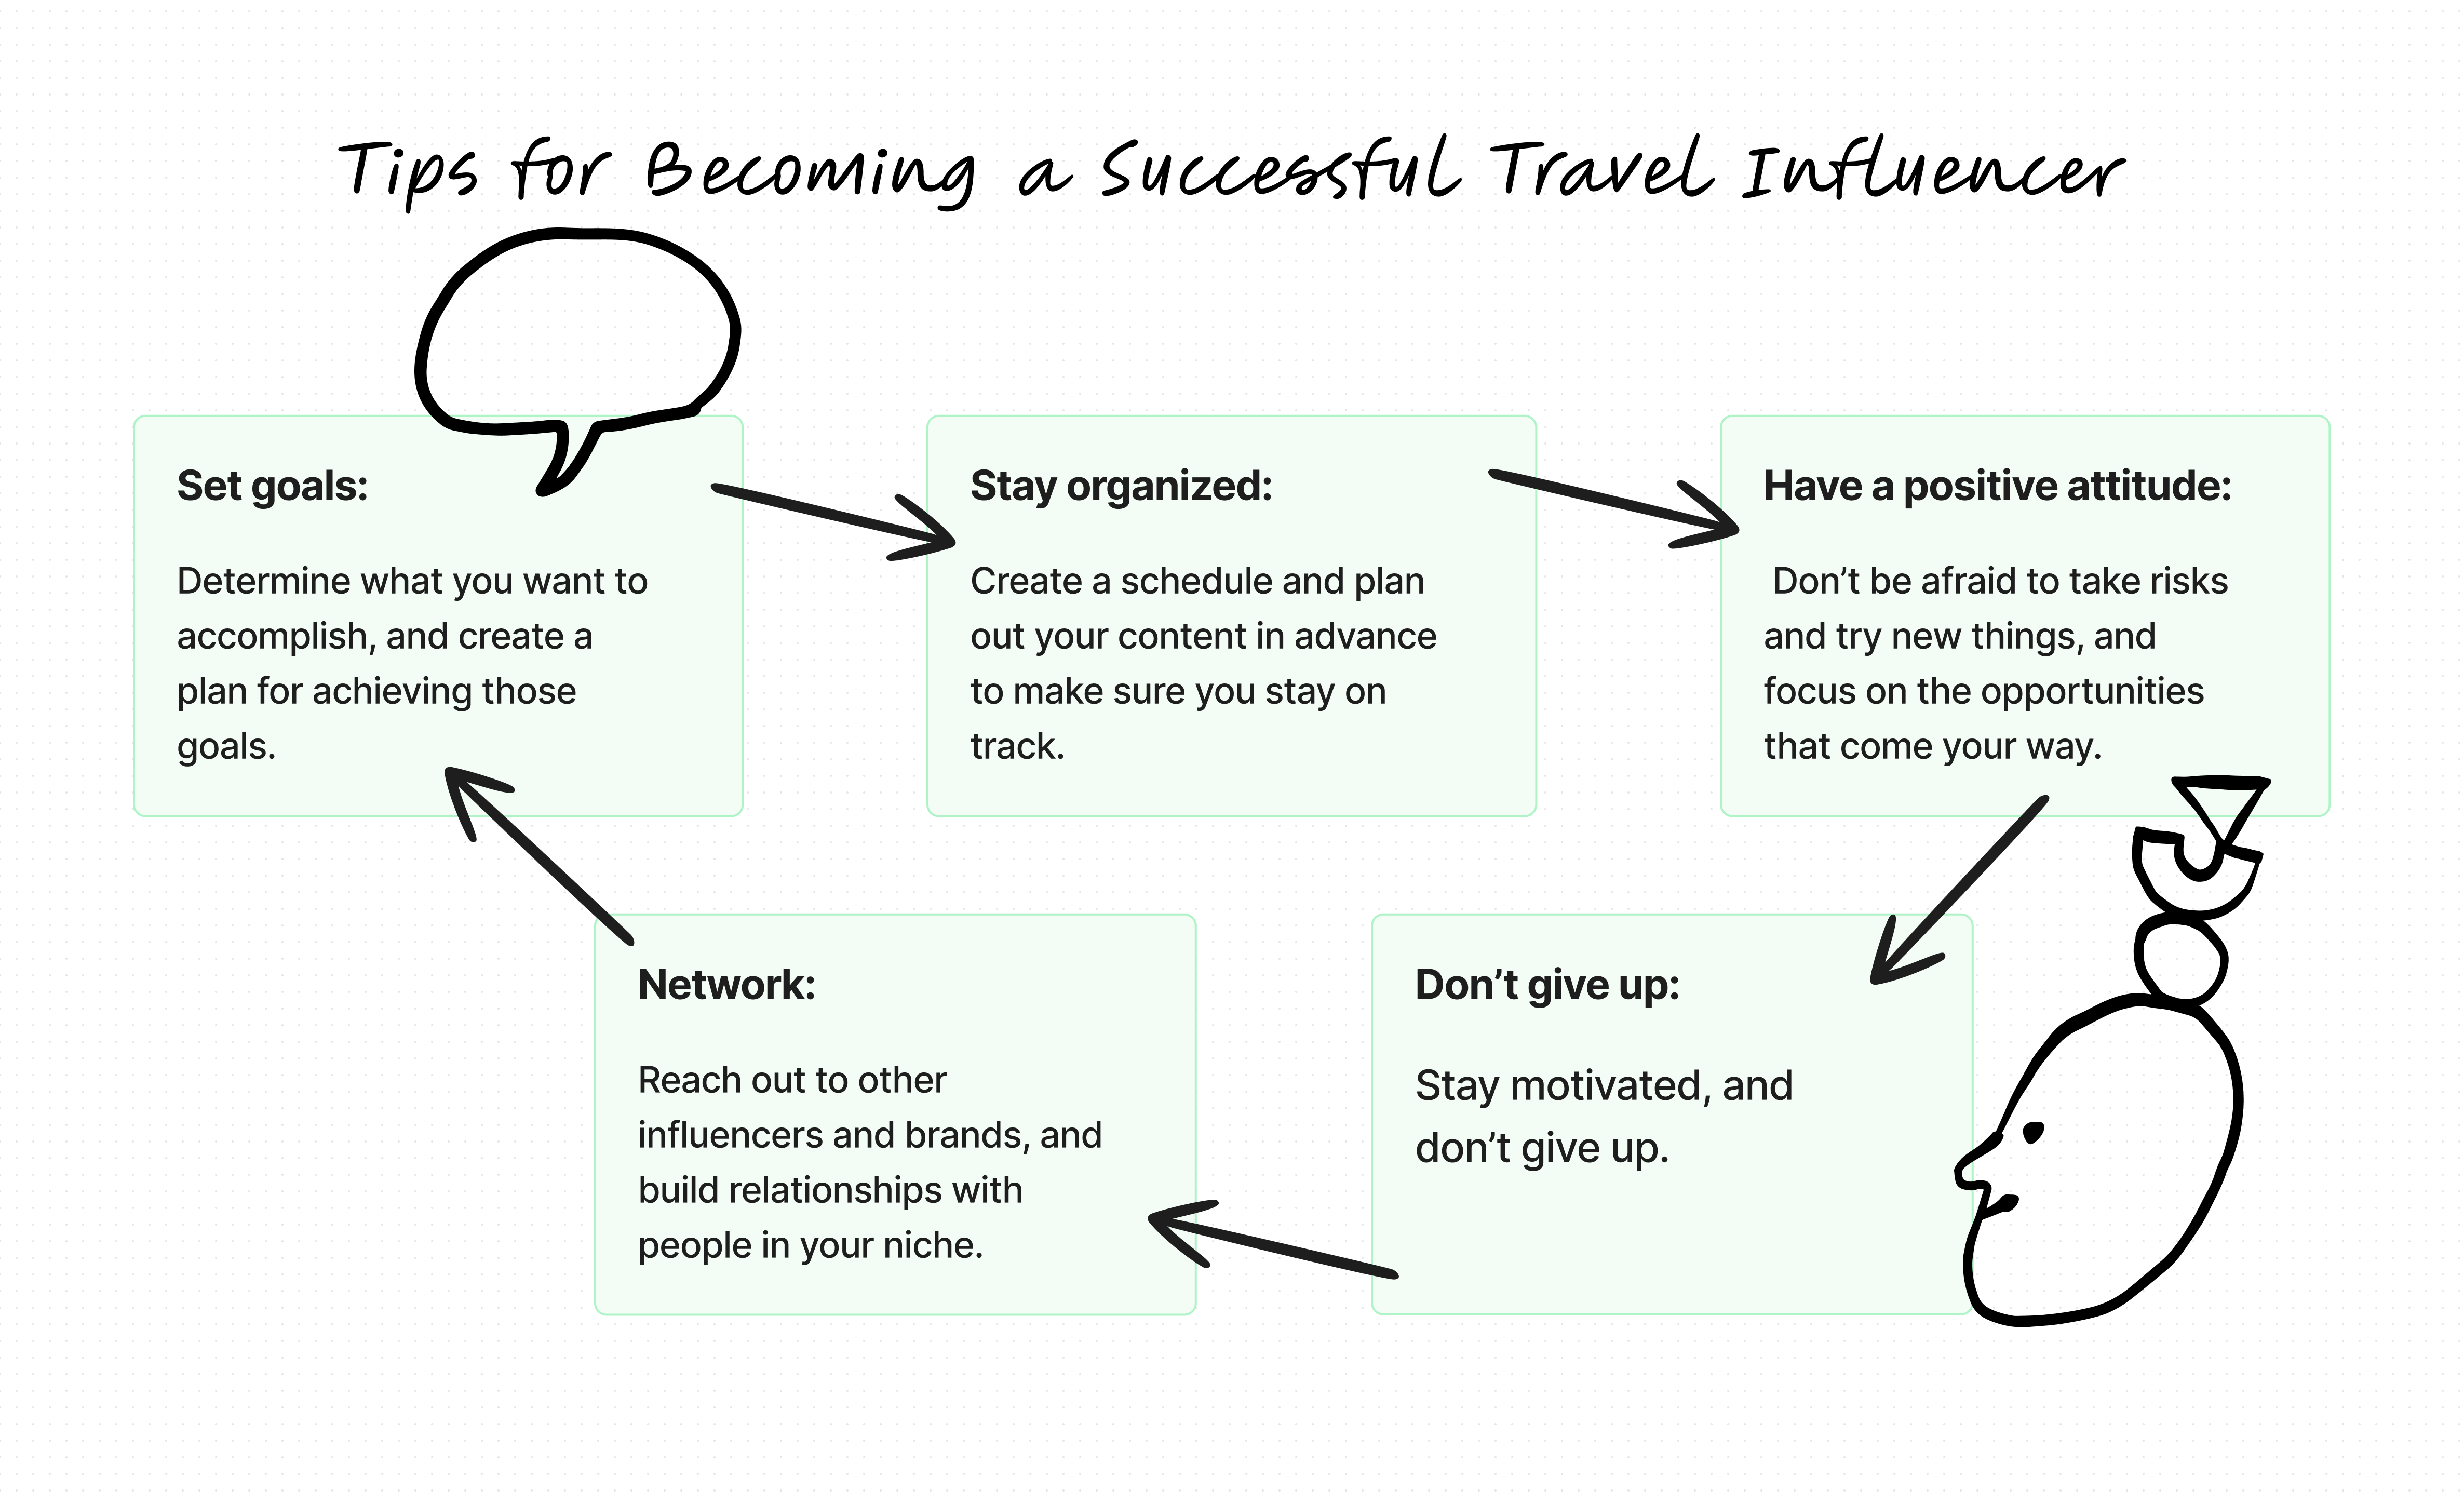 Tips for becoming a successful travel influencer chart